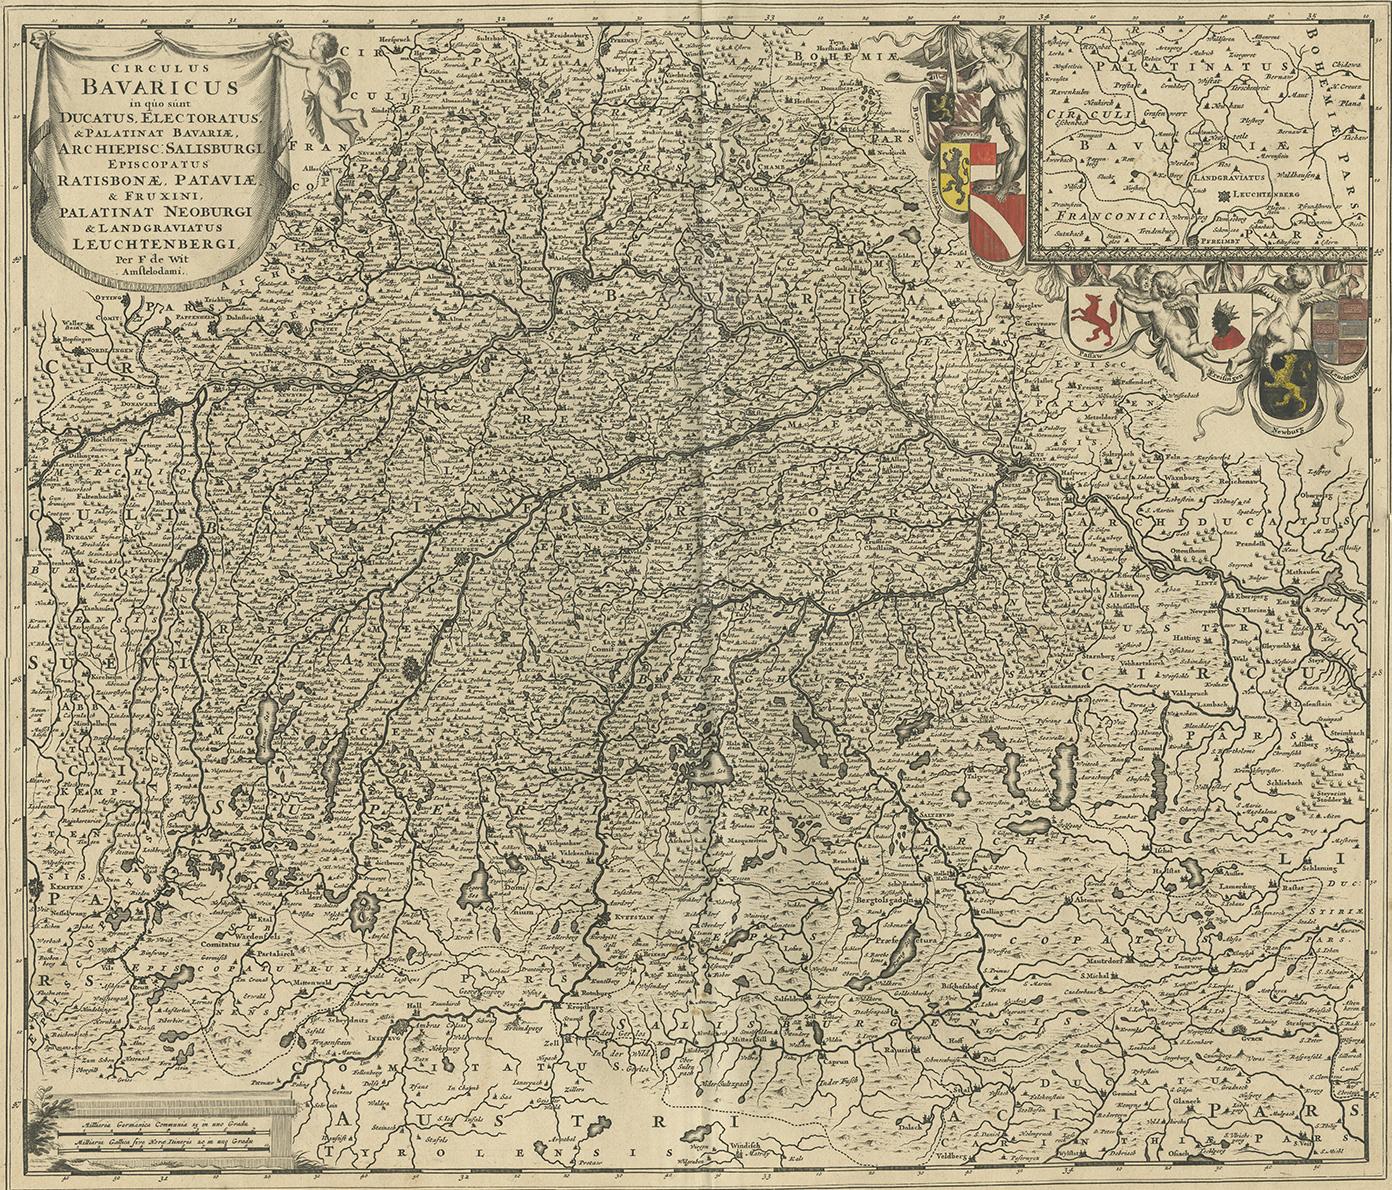 This antique map depicts a portion of southern Germany that included the historic regions of Bavaria, the Palatinate, Prussia-Brandenburg, the Rhineland and Saxony. Regensberg, Freising and Munich are at the center of the image with areas shown east